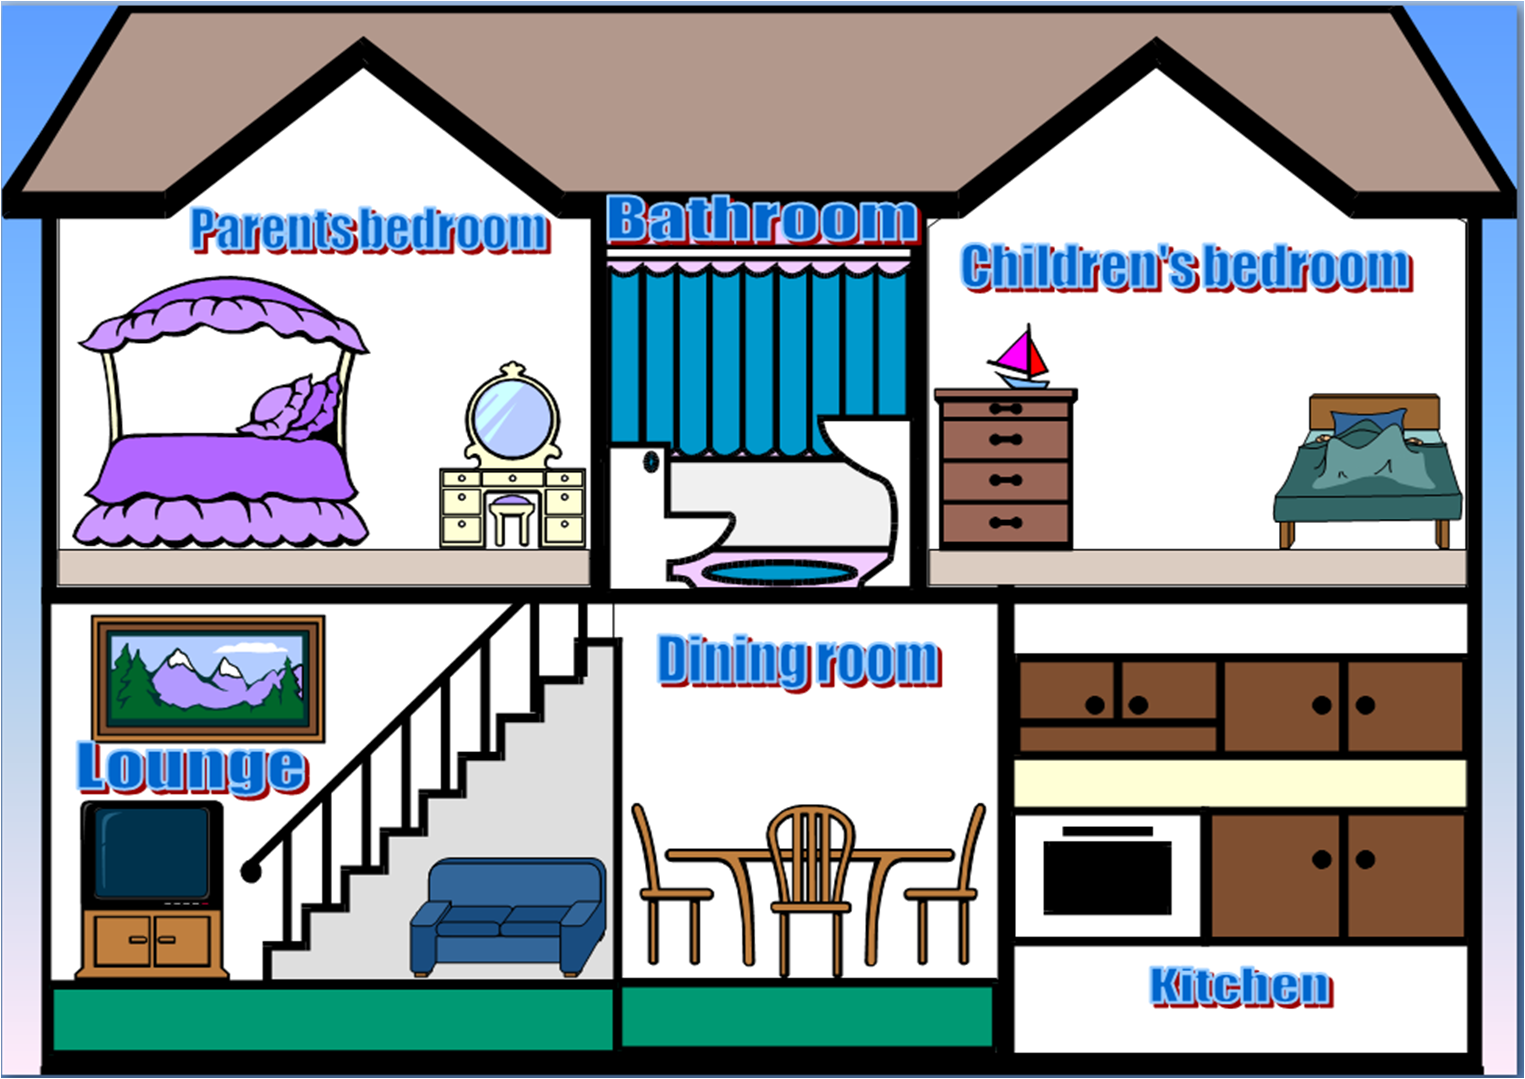 House Rooms for Kids. Rooms in the House for Kids. Parts of the House for Kids. Rooms in the House pictures. My house слушать